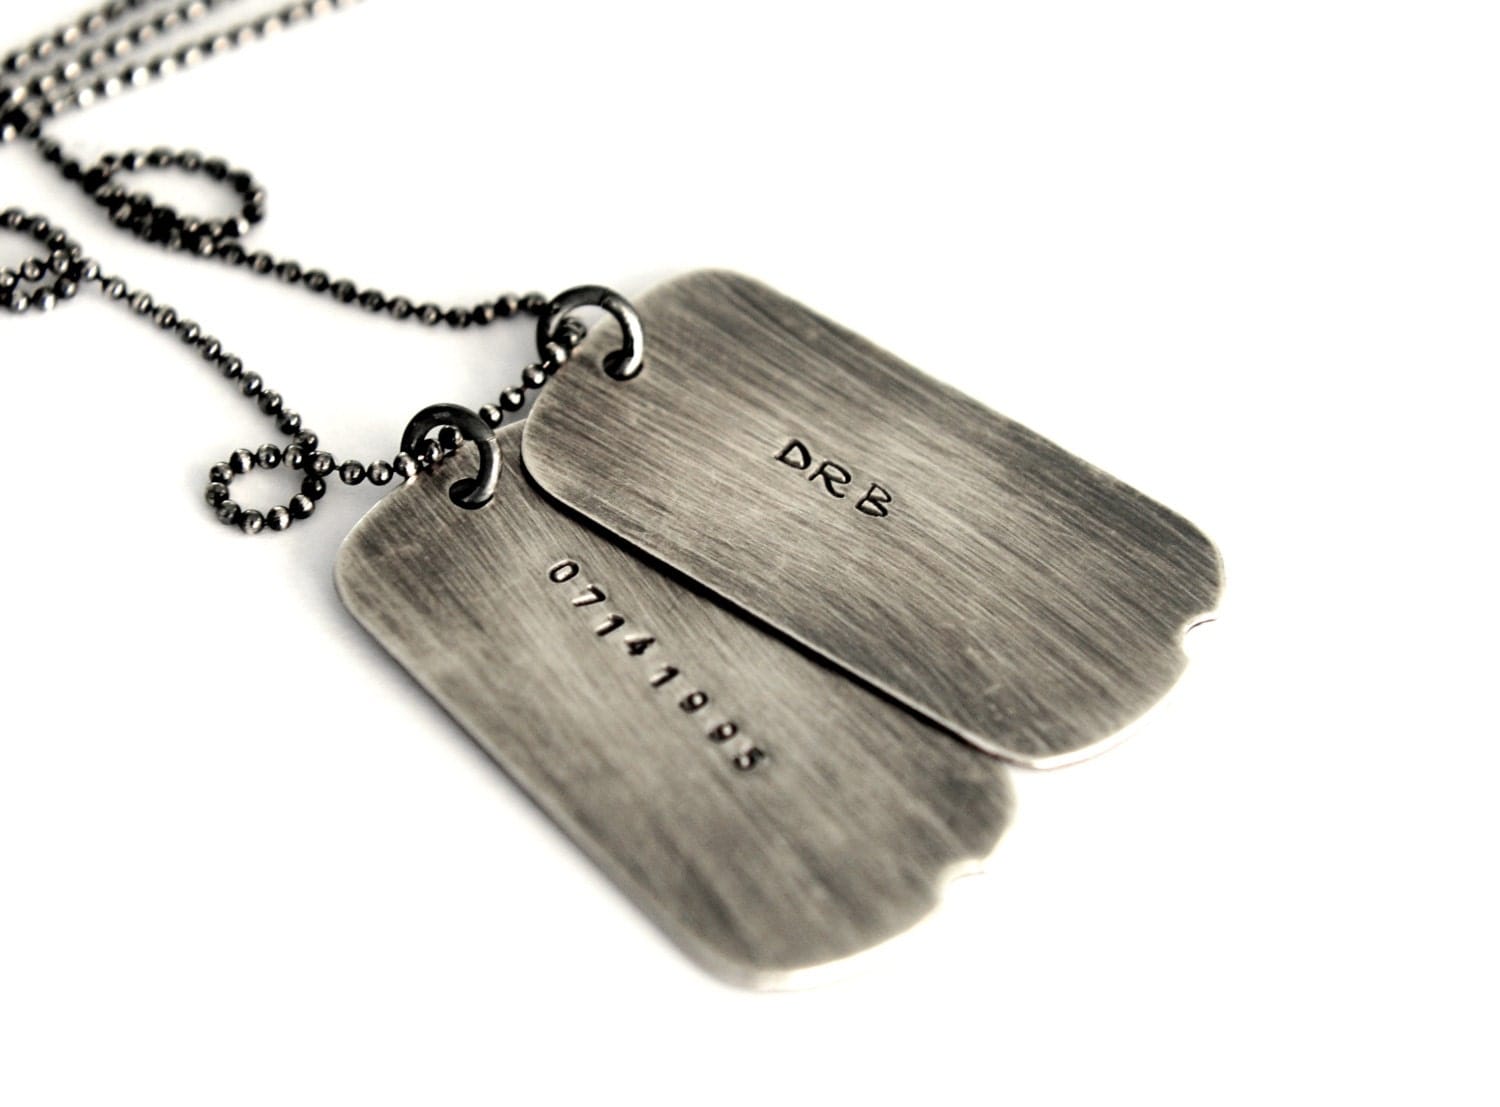 Mens Dog Tag Necklace Military Style Dog Tags Gift For Him